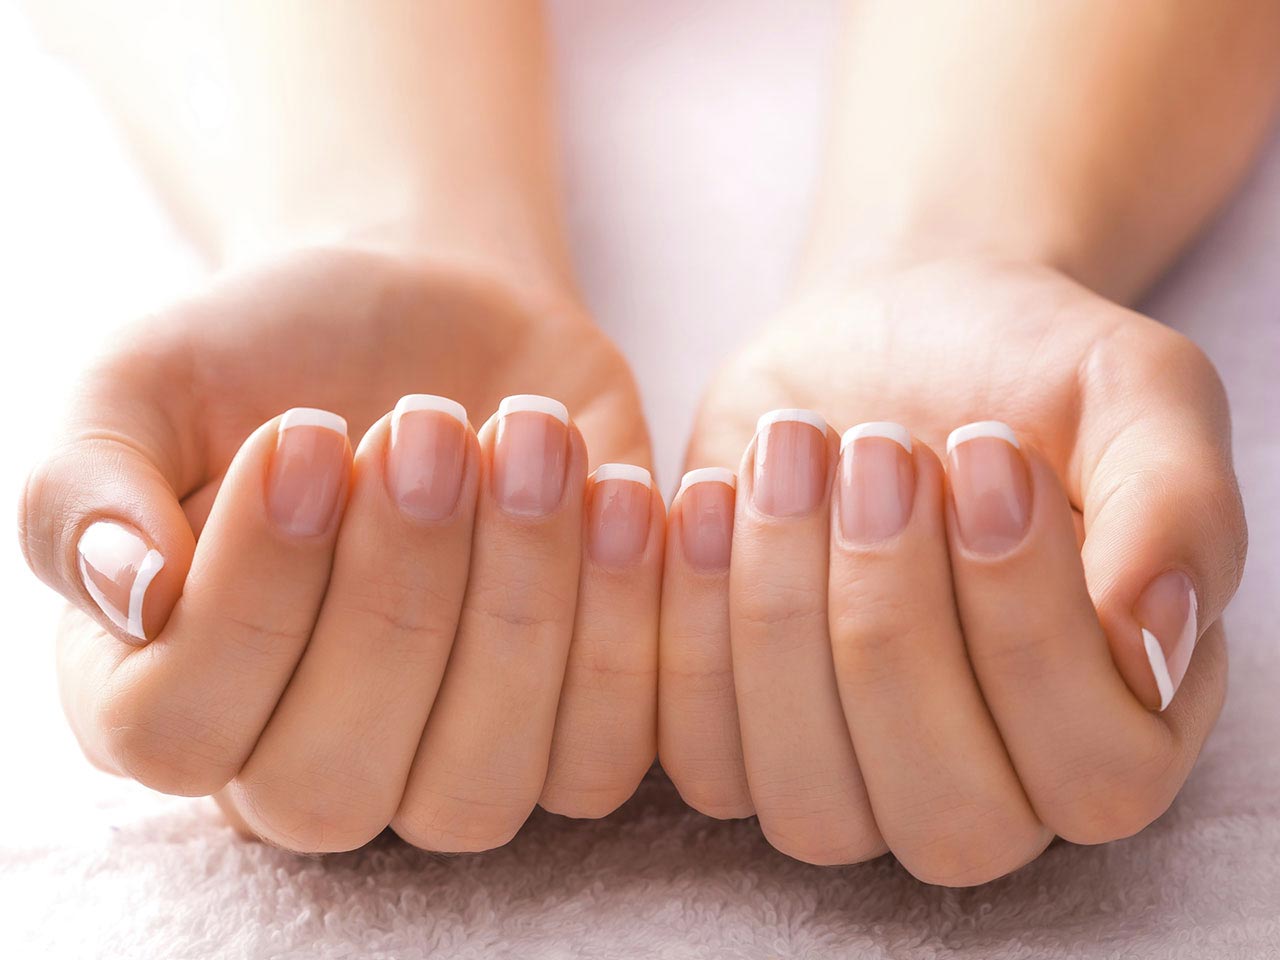 5 tips for strong, shiny nails